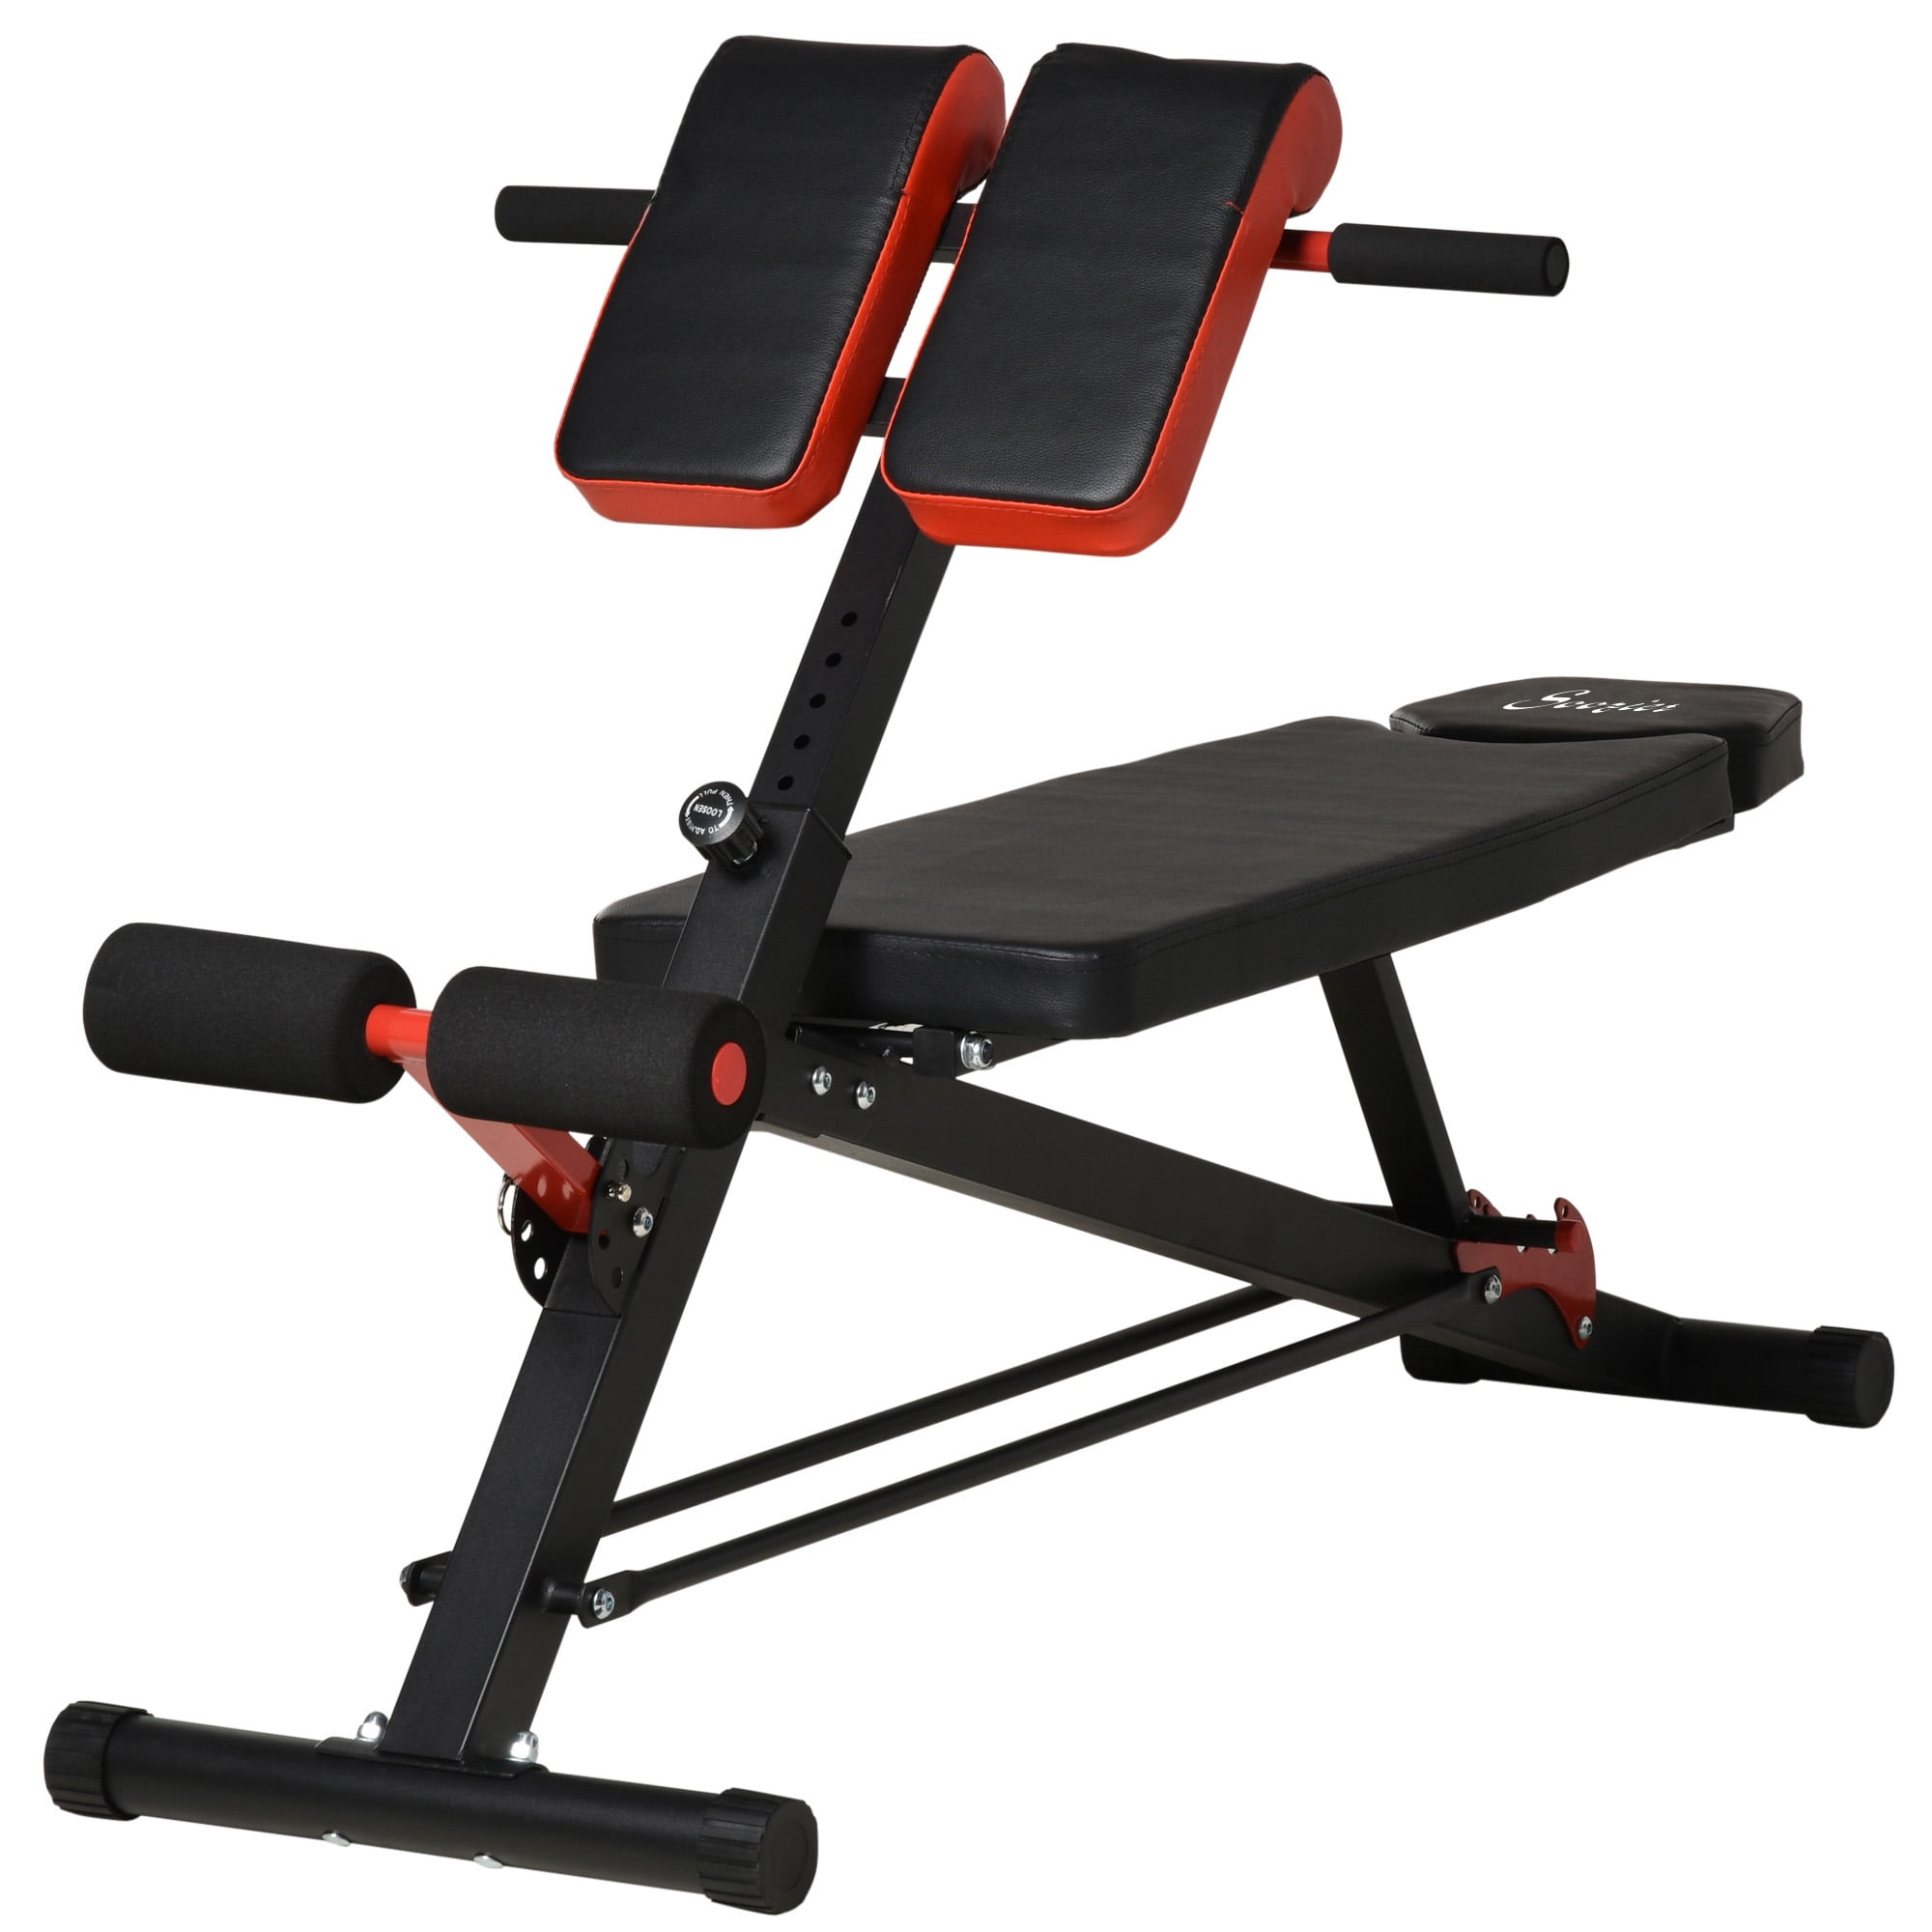 MaxStrength Adjustable Weight Bench Gym Bench Workout Bench multi-function foldable bench press with weights and bar multi-function foldable bench press 